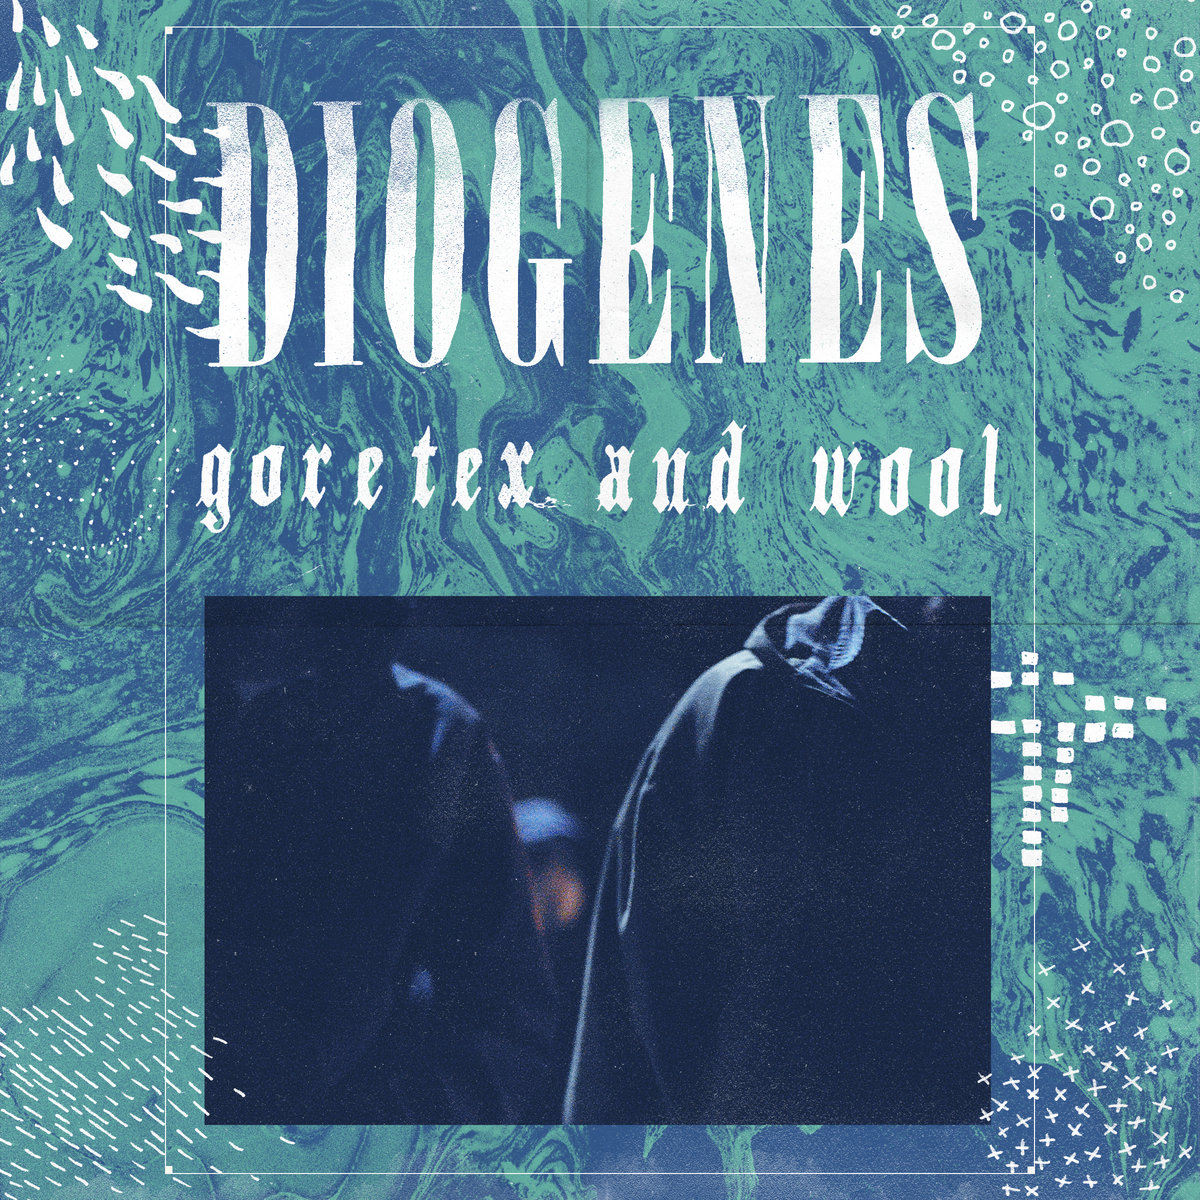 Diogenes - "Goretex and Wool" (Release)